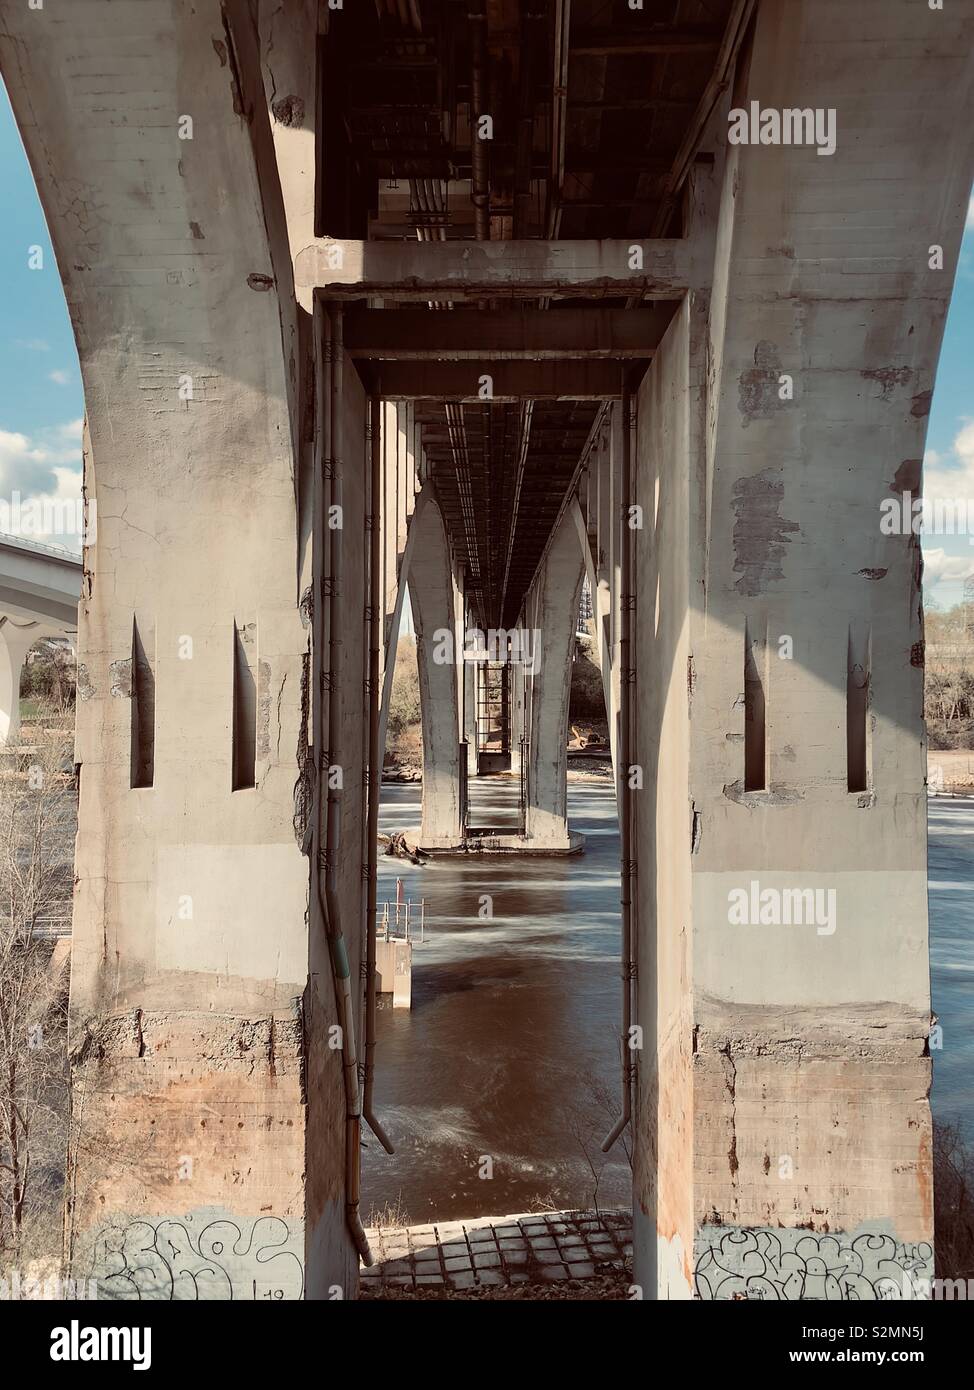 Looking underneath an old bridge that spans a large river. Stock Photo